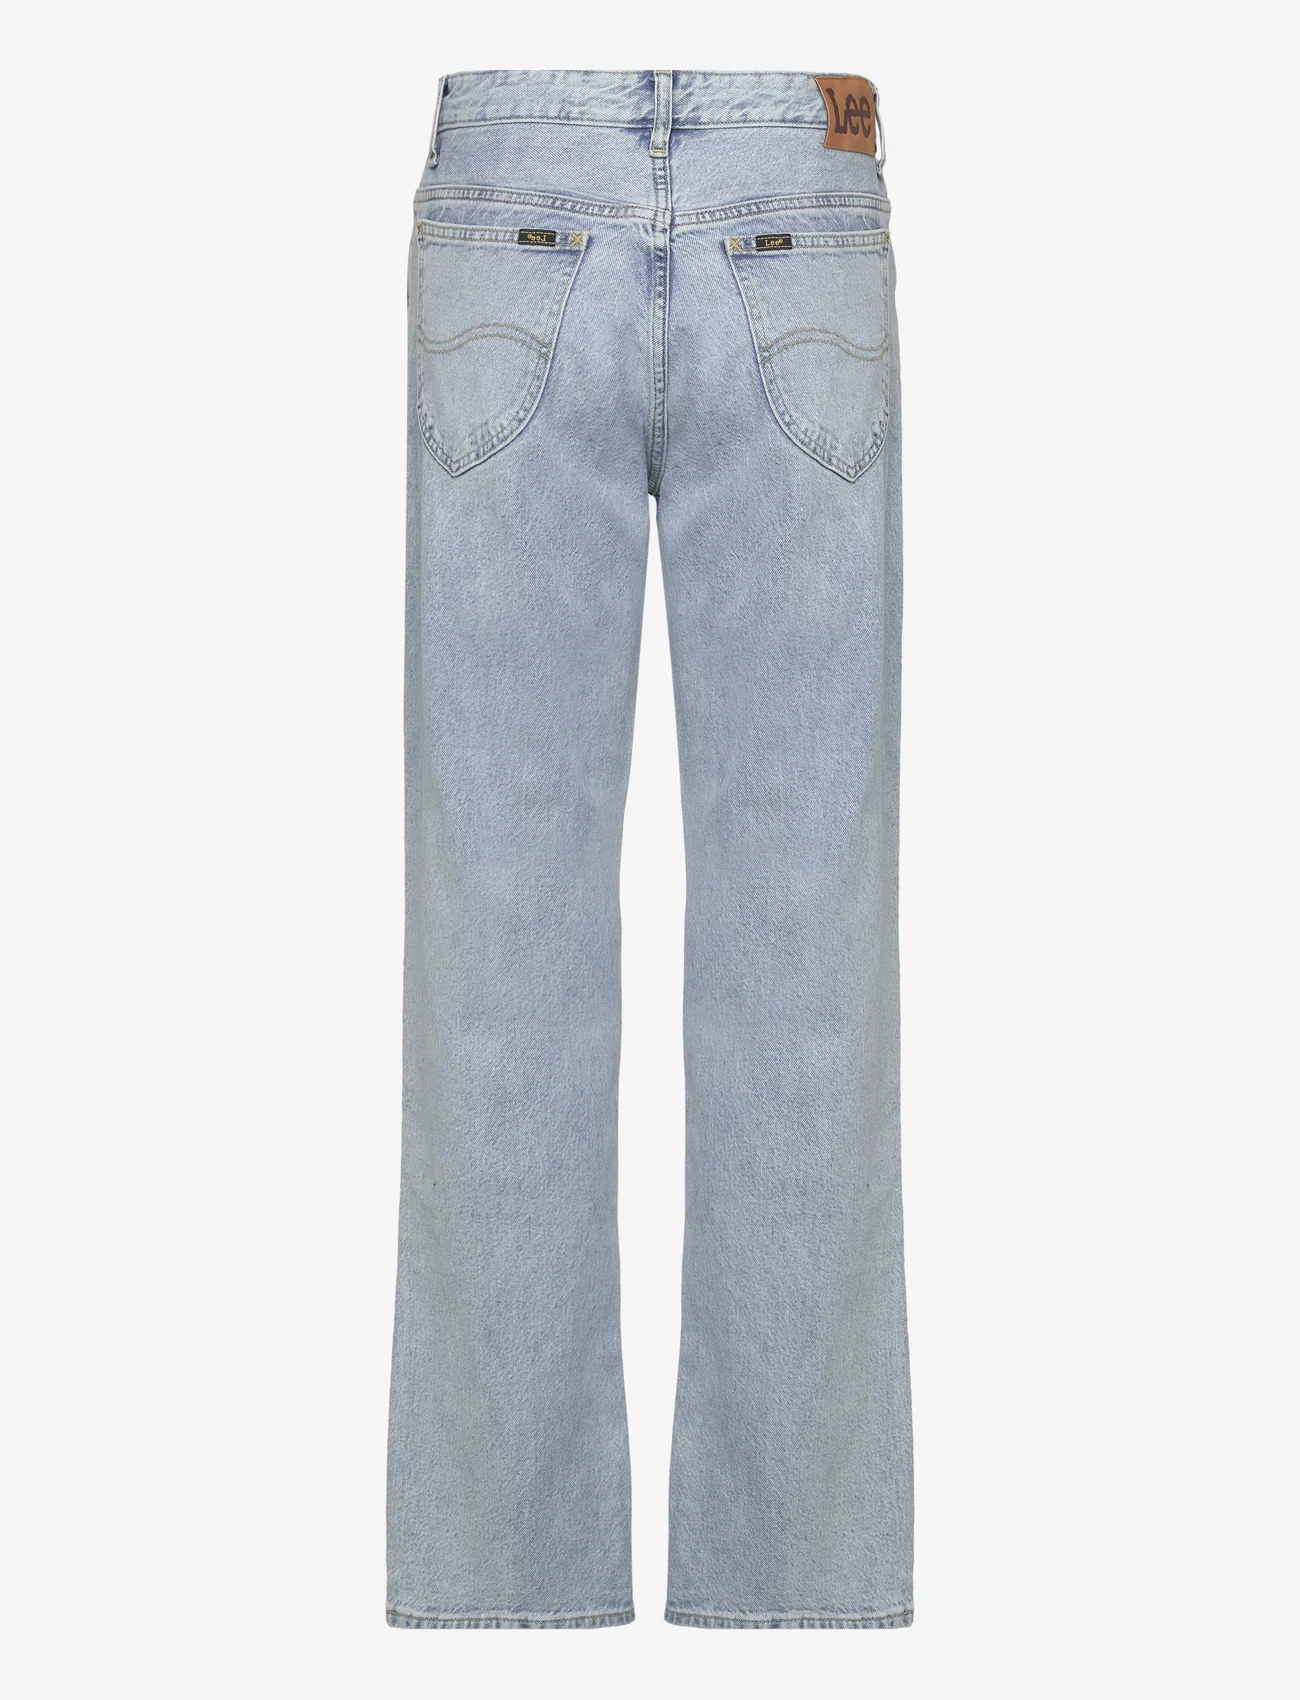 Lee Jeans - RIDER CLASSIC JEANS - tiesaus kirpimo džinsai - washed in light - 1